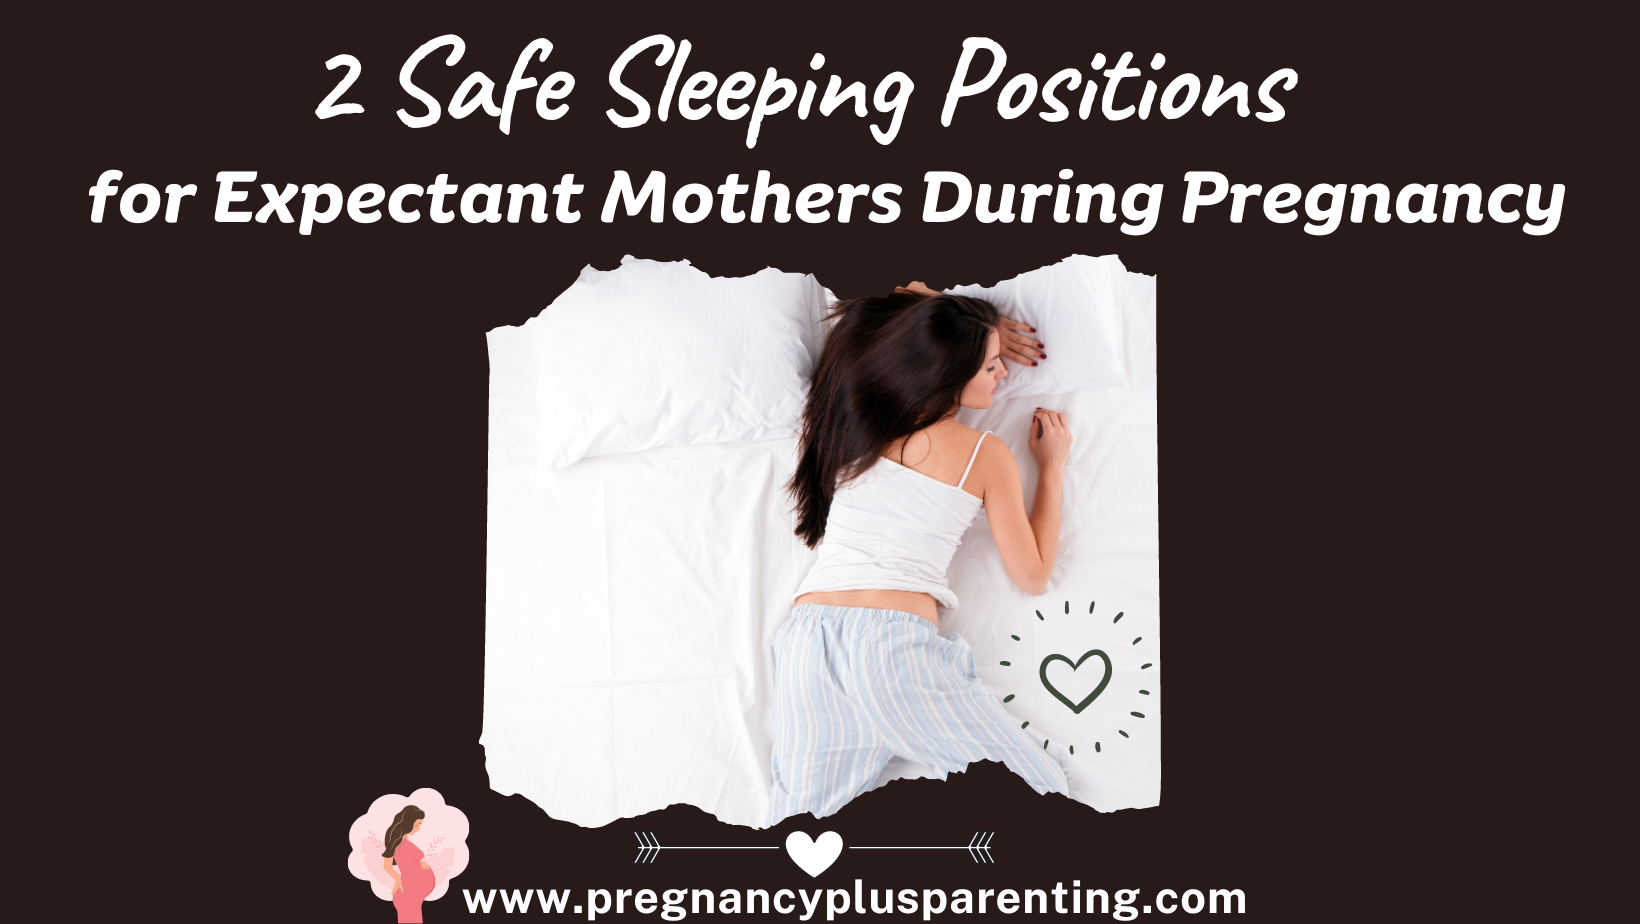 2 Safe Sleeping Positions for Expectant Mothers During Pregnancy